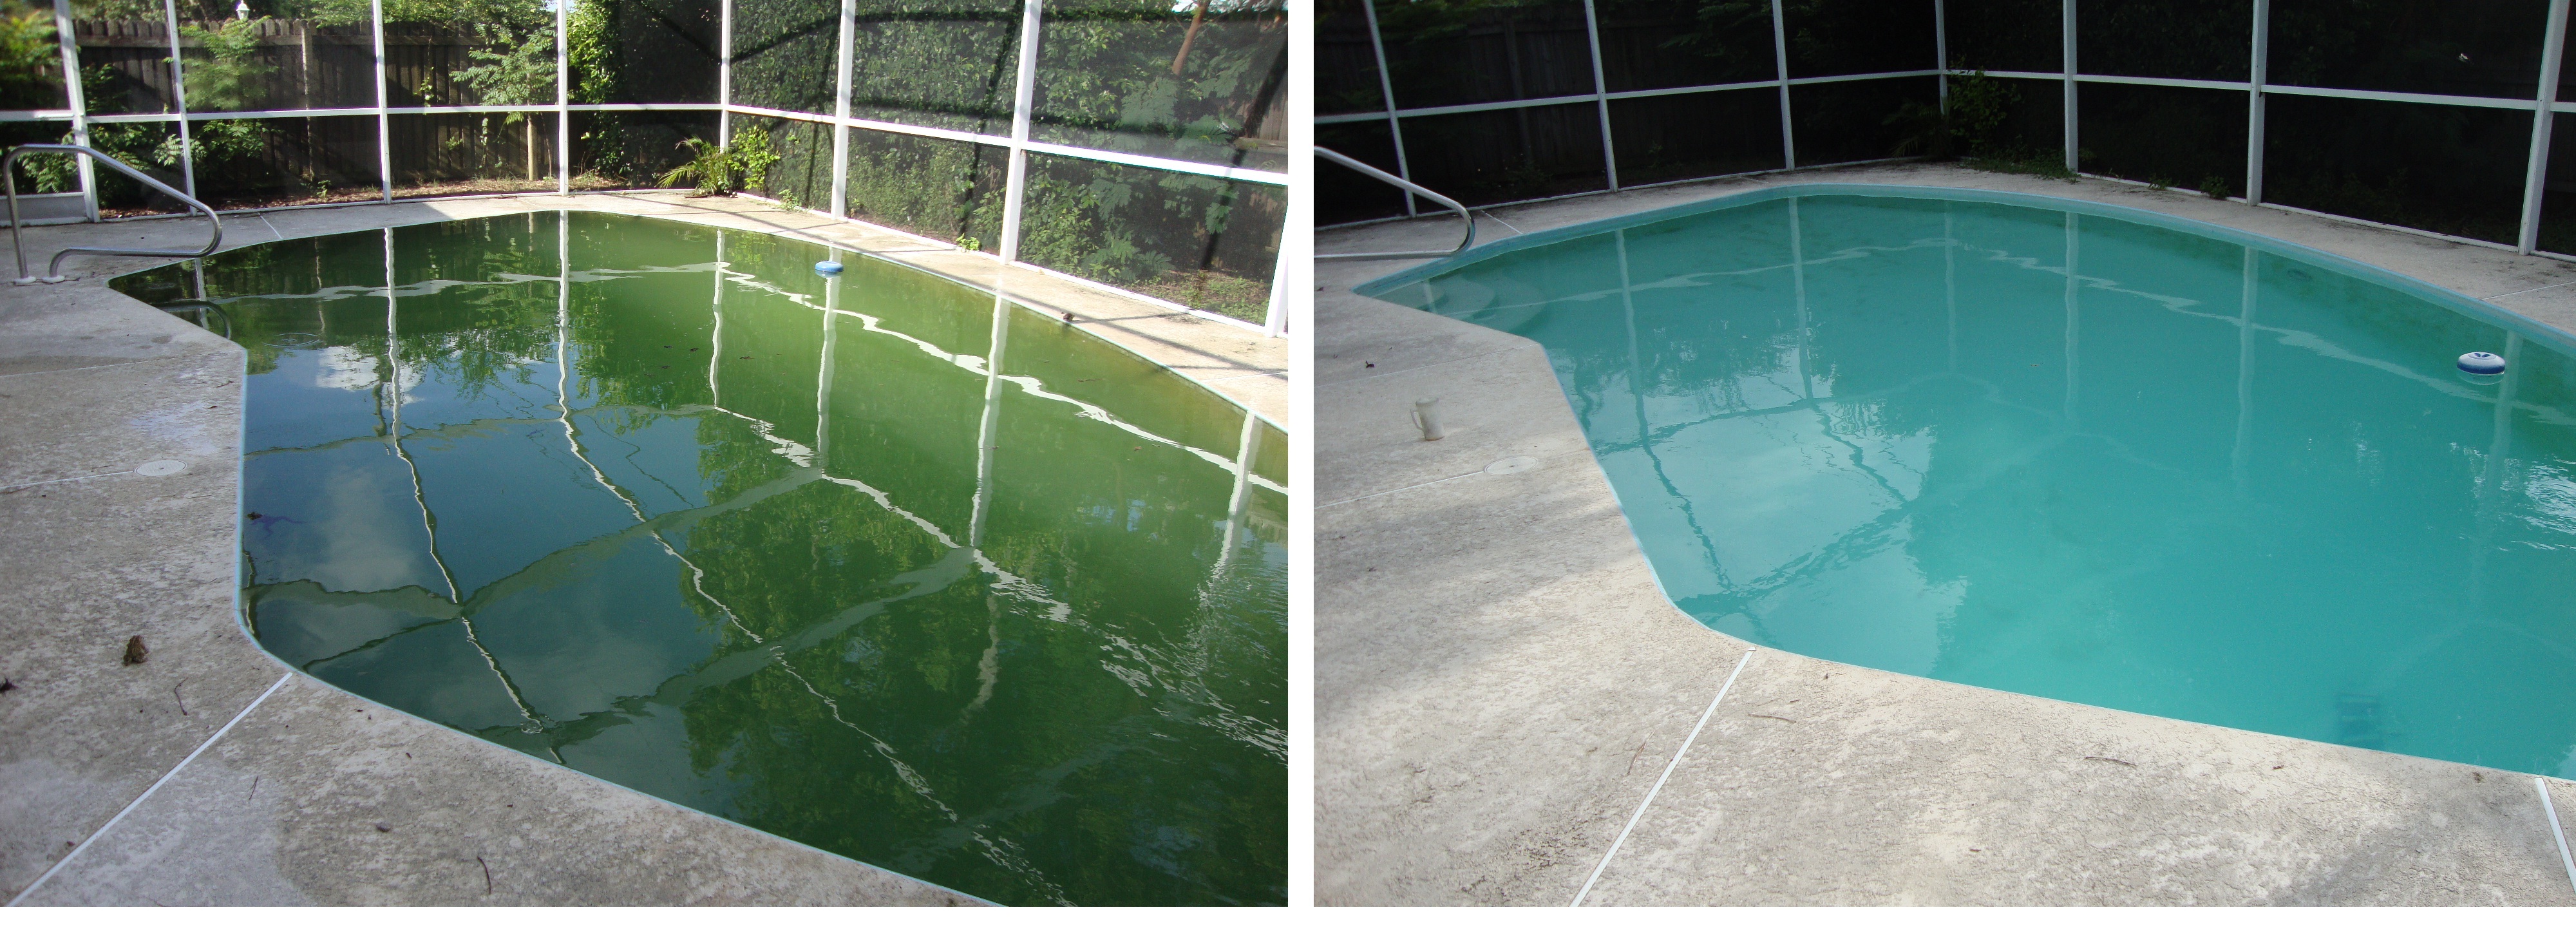 Swimming Pool Liners - Clearwater Swimming Pools Ltd